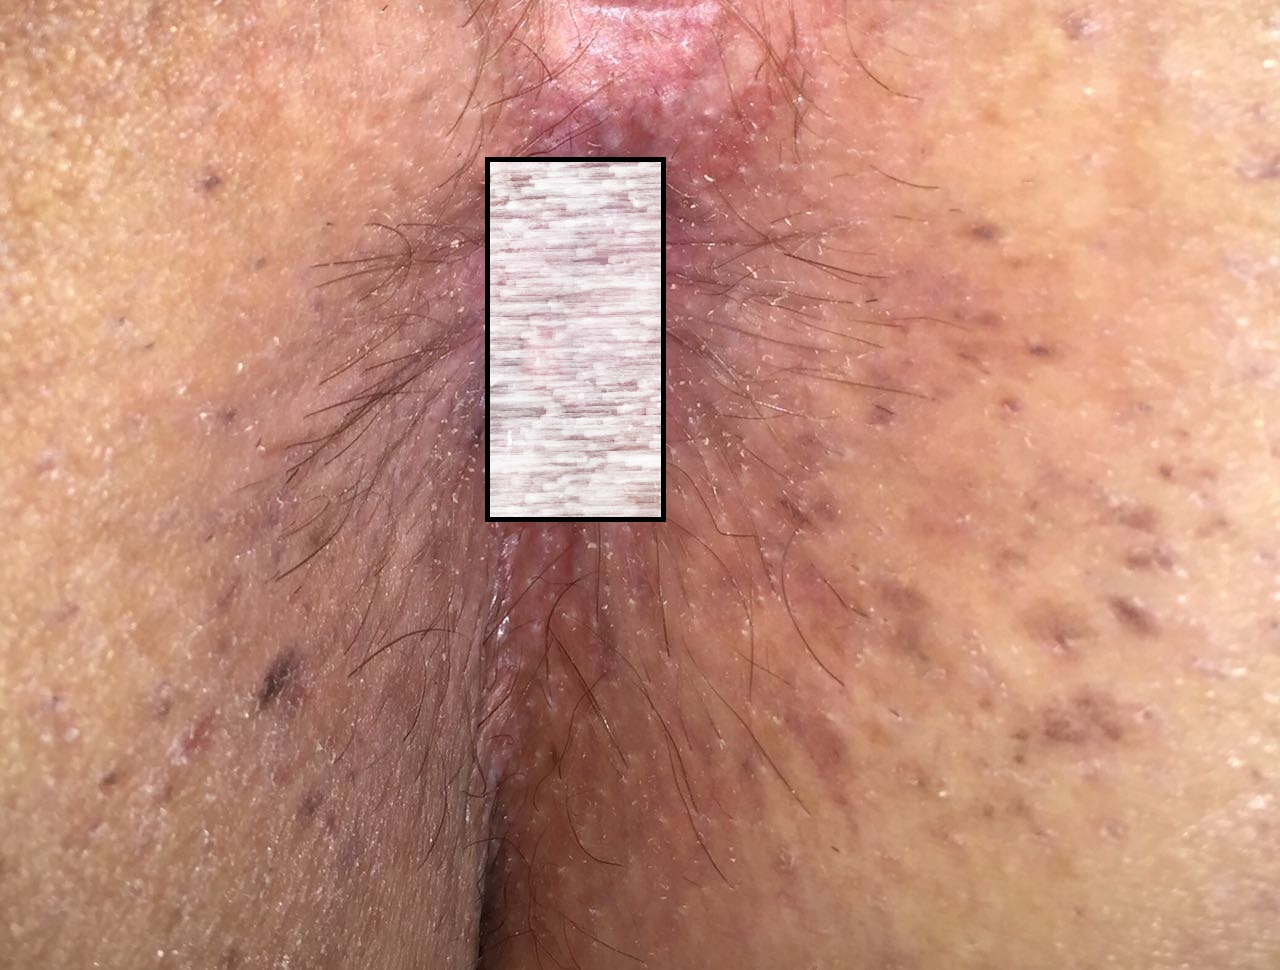 anal warts  after treatment